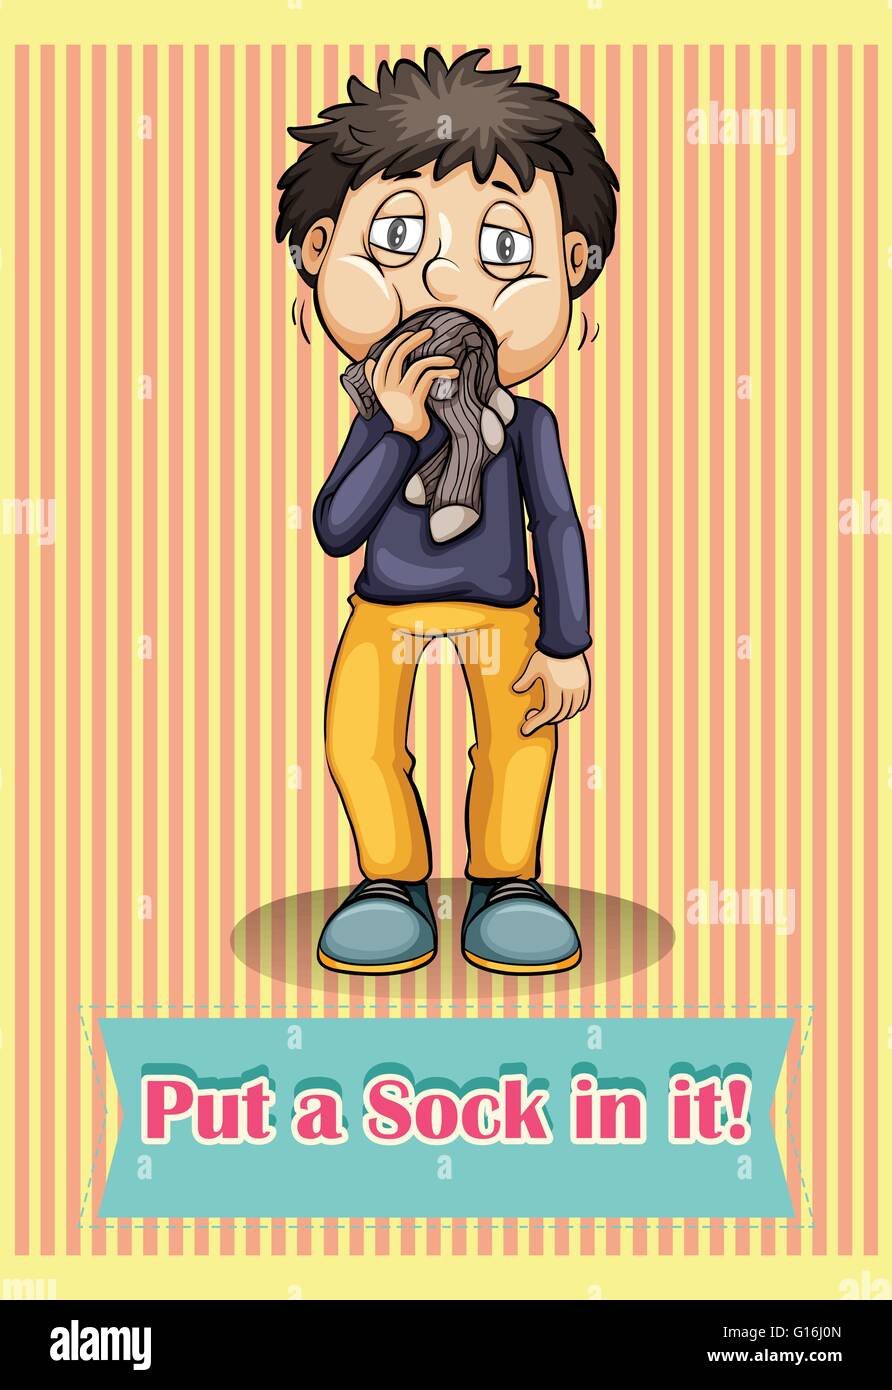 Idiom put a sock in it illustration Stock Vector